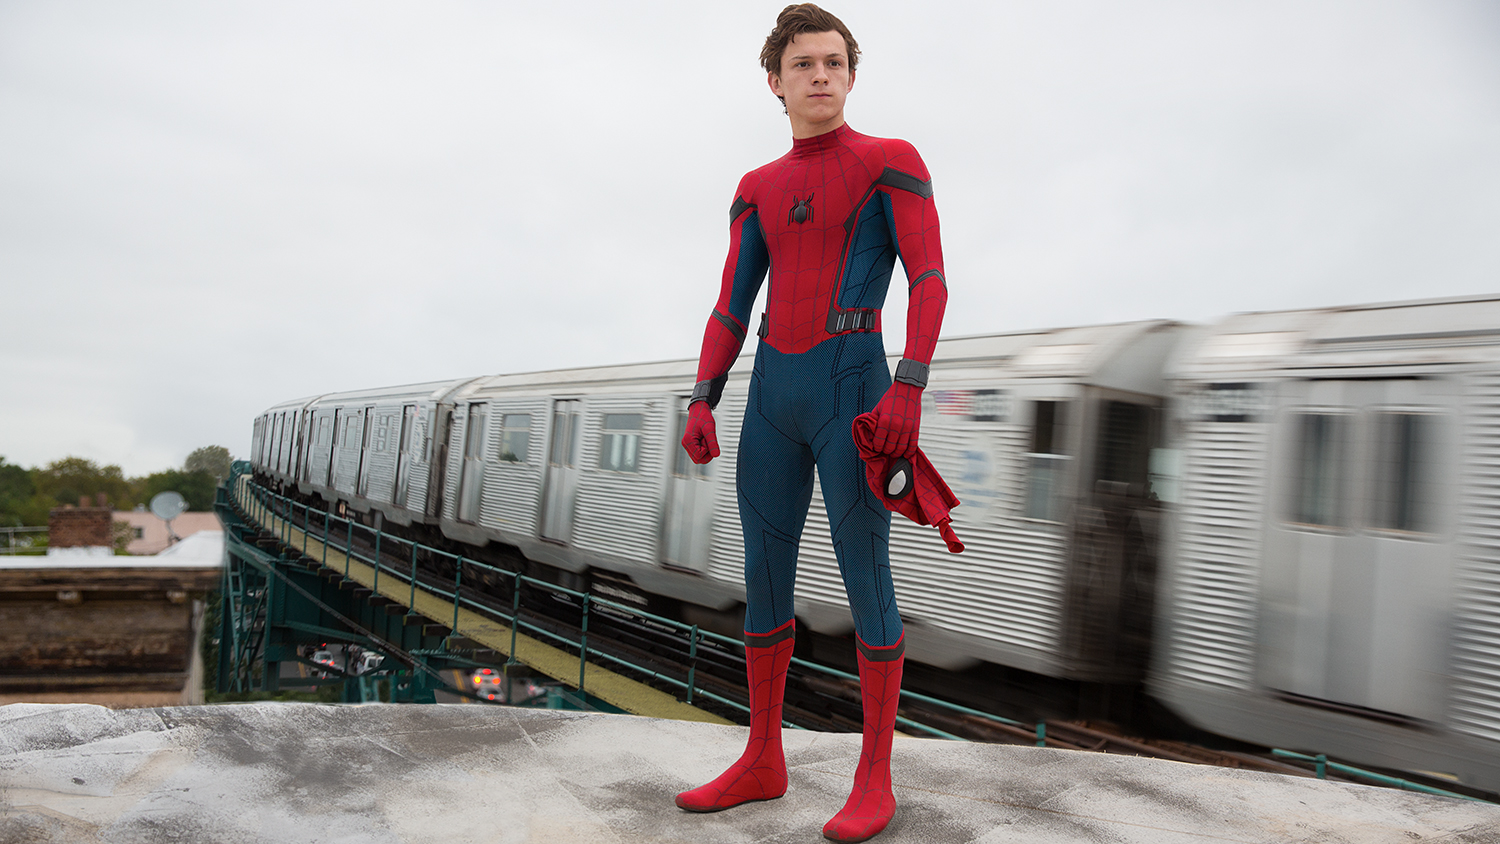 Spider-Man with his mask off standing atop a train in Spider-Man: Homecoming.